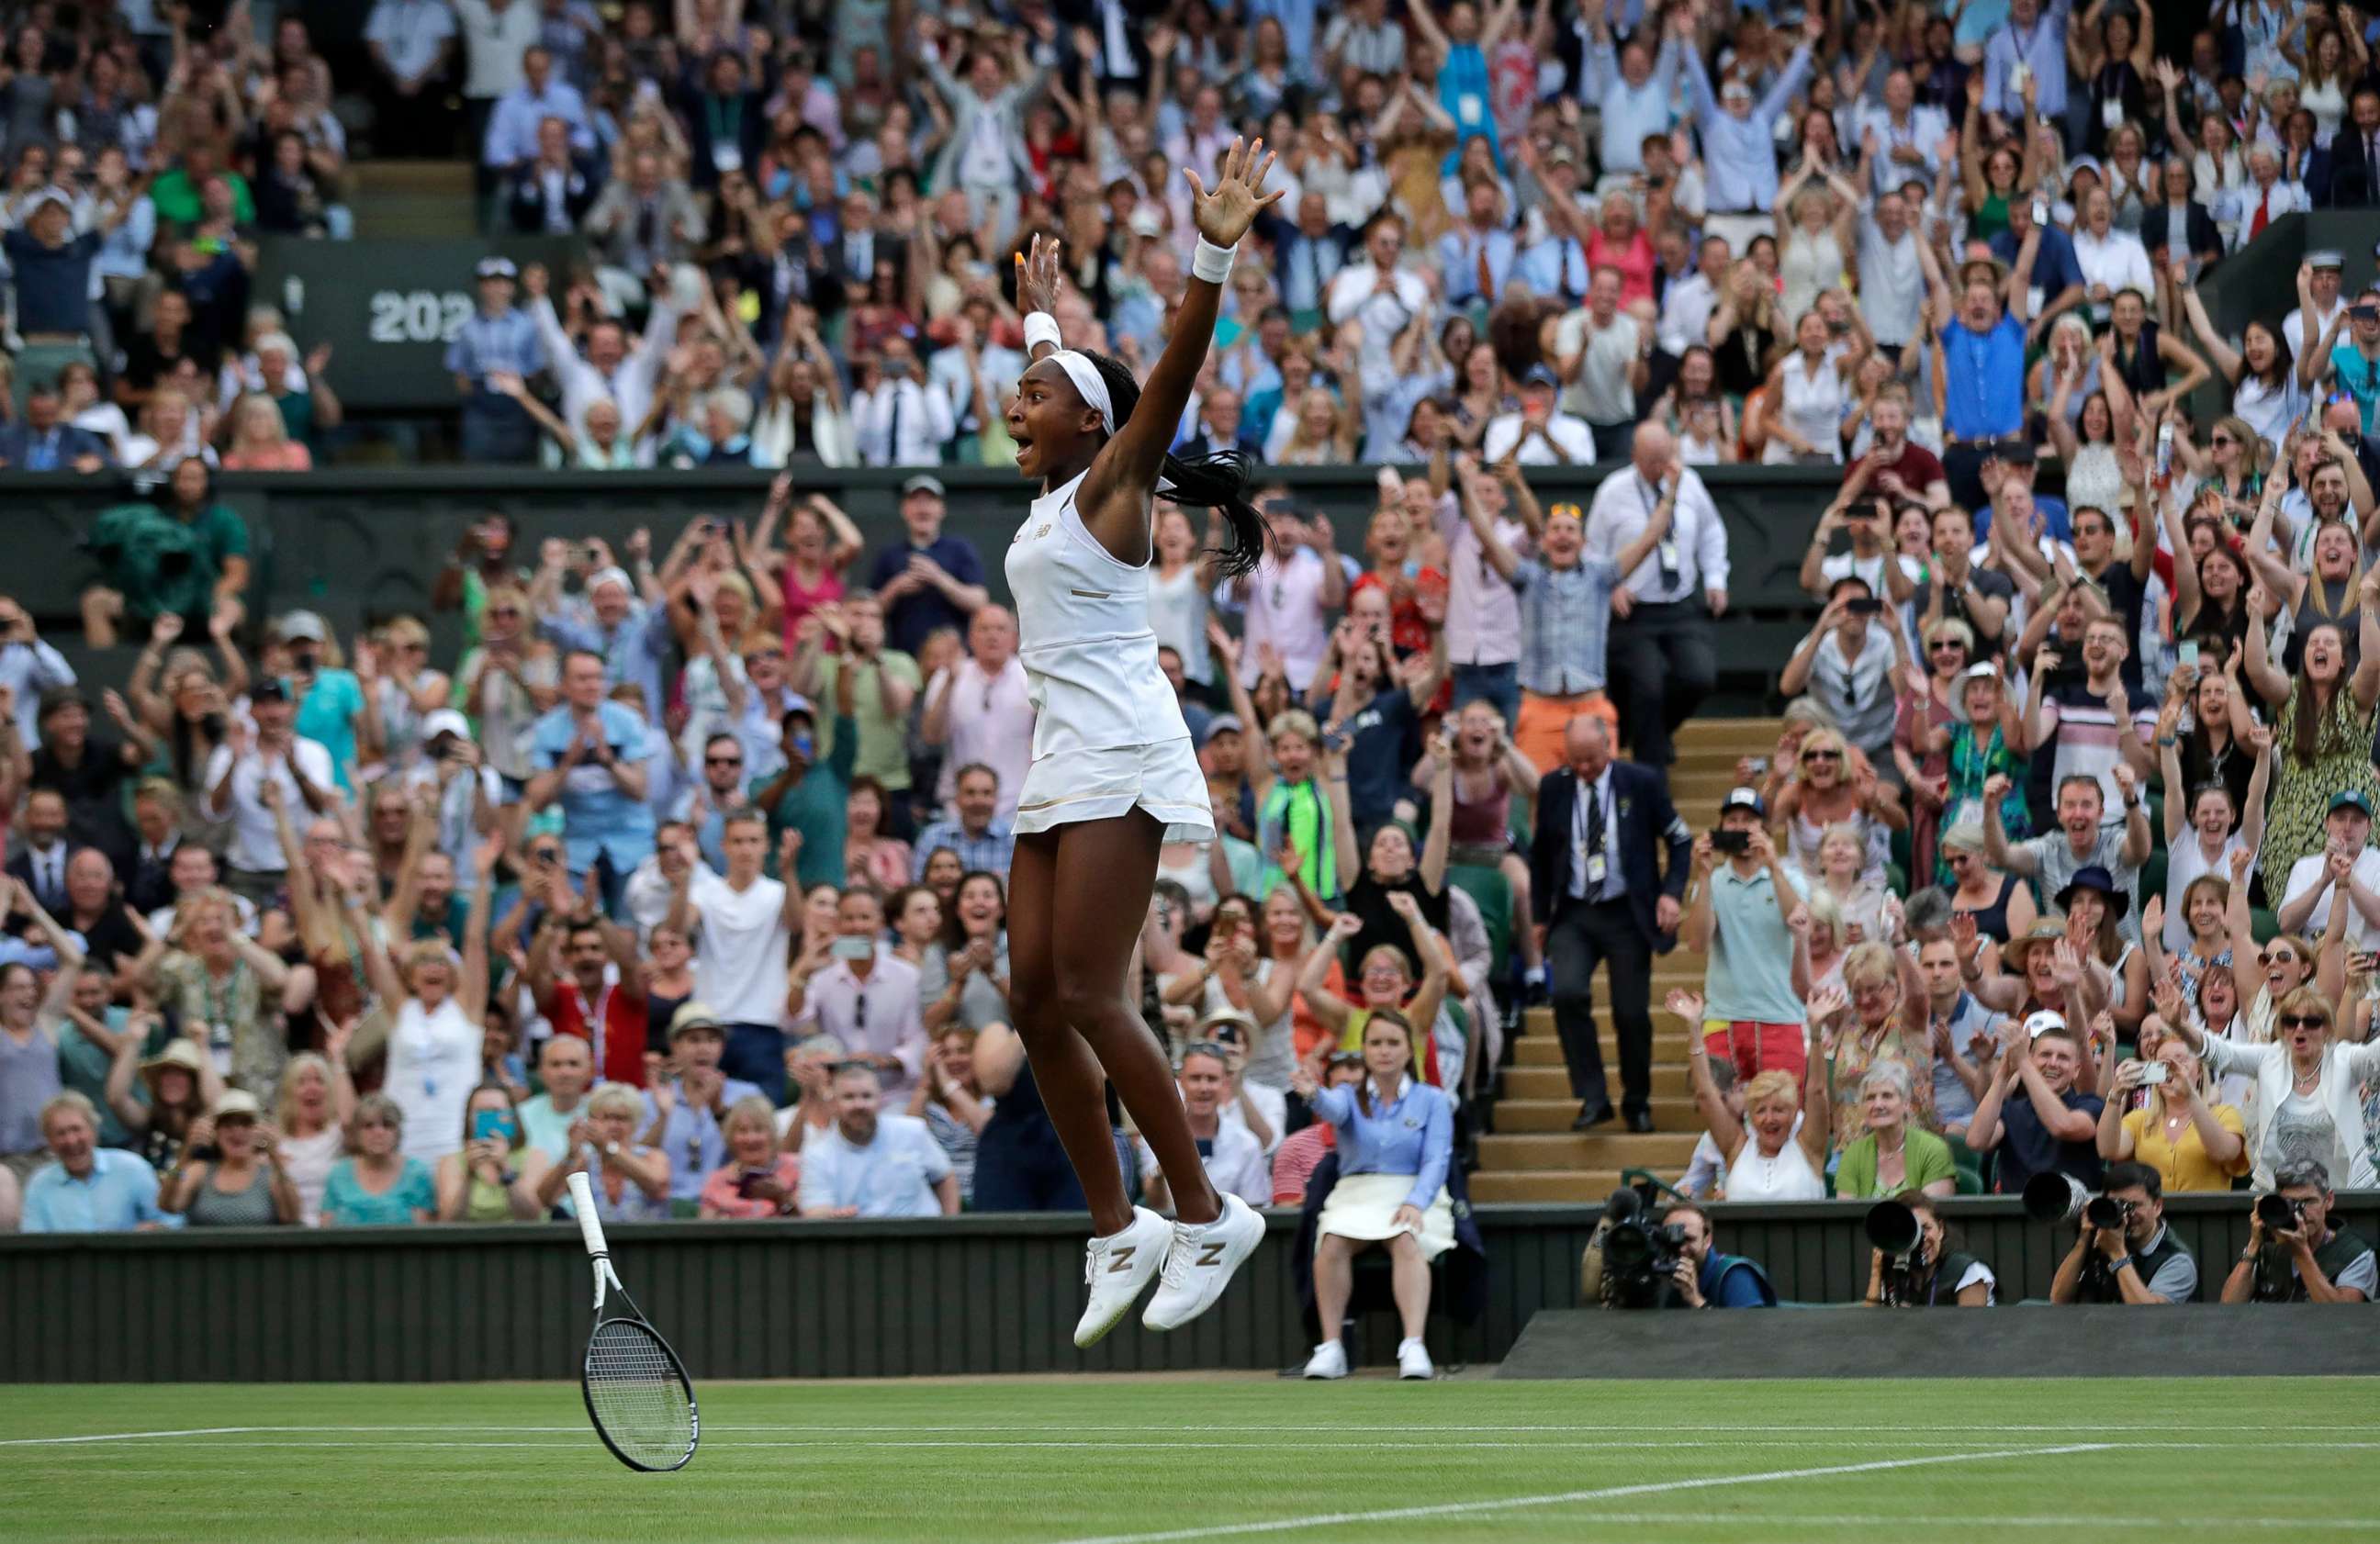 Coco Gauff stages comeback at Wimbledon, defeats Polona Hercog to advance to Round of 16